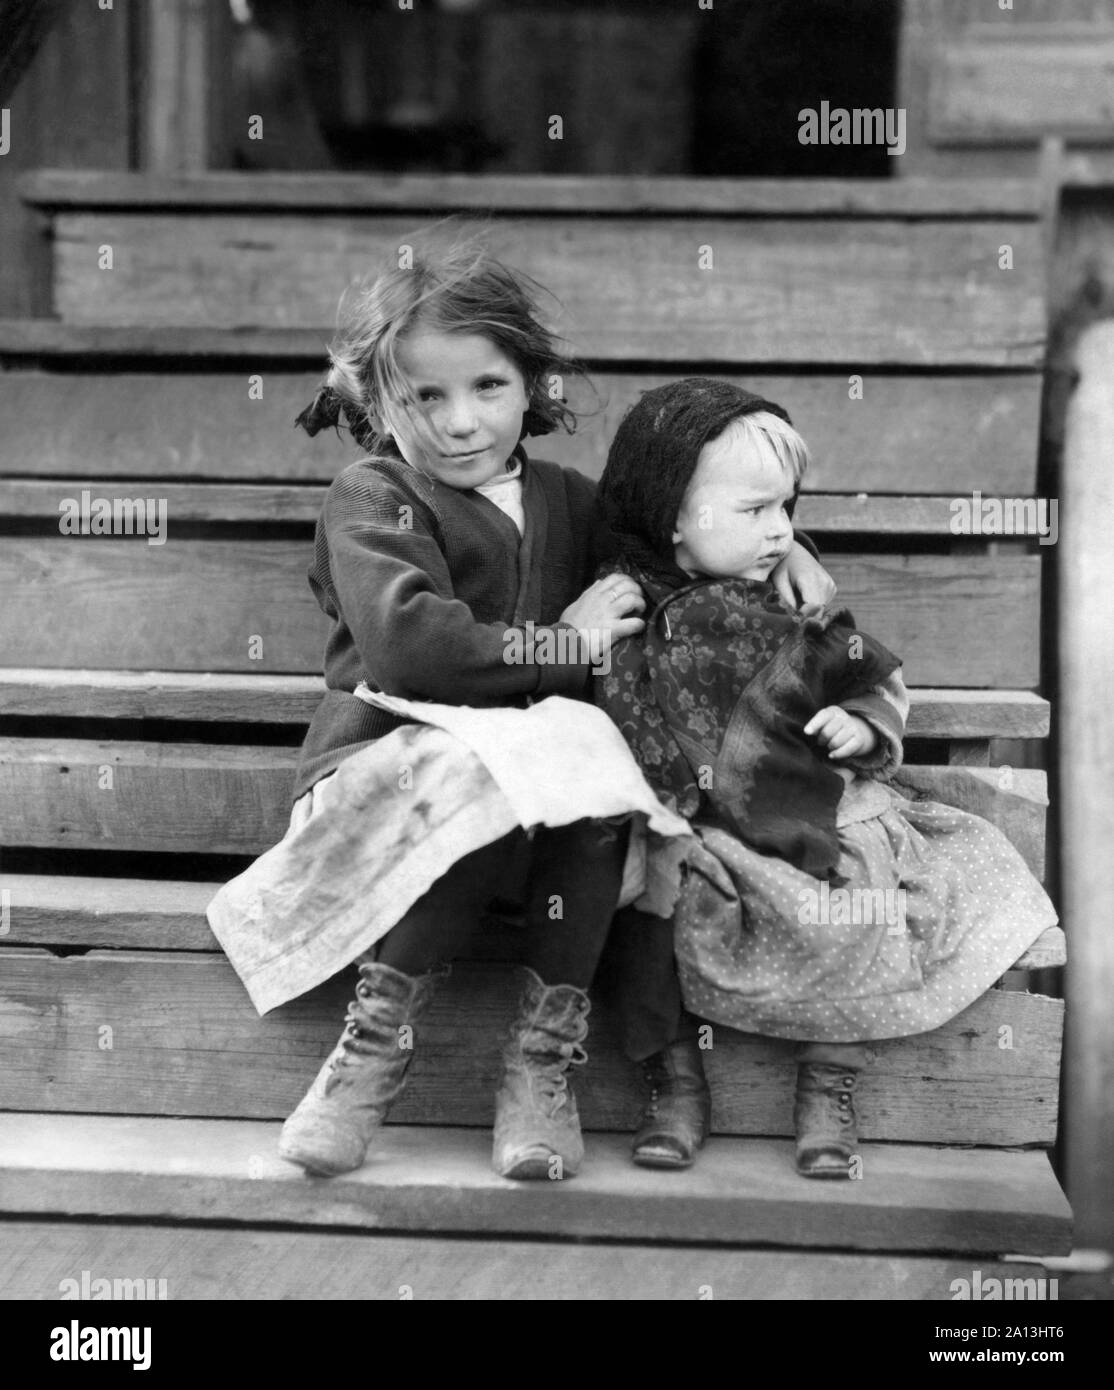 A young child tending to her younger sister in Bayou La Batre, Alabama. Stock Photo